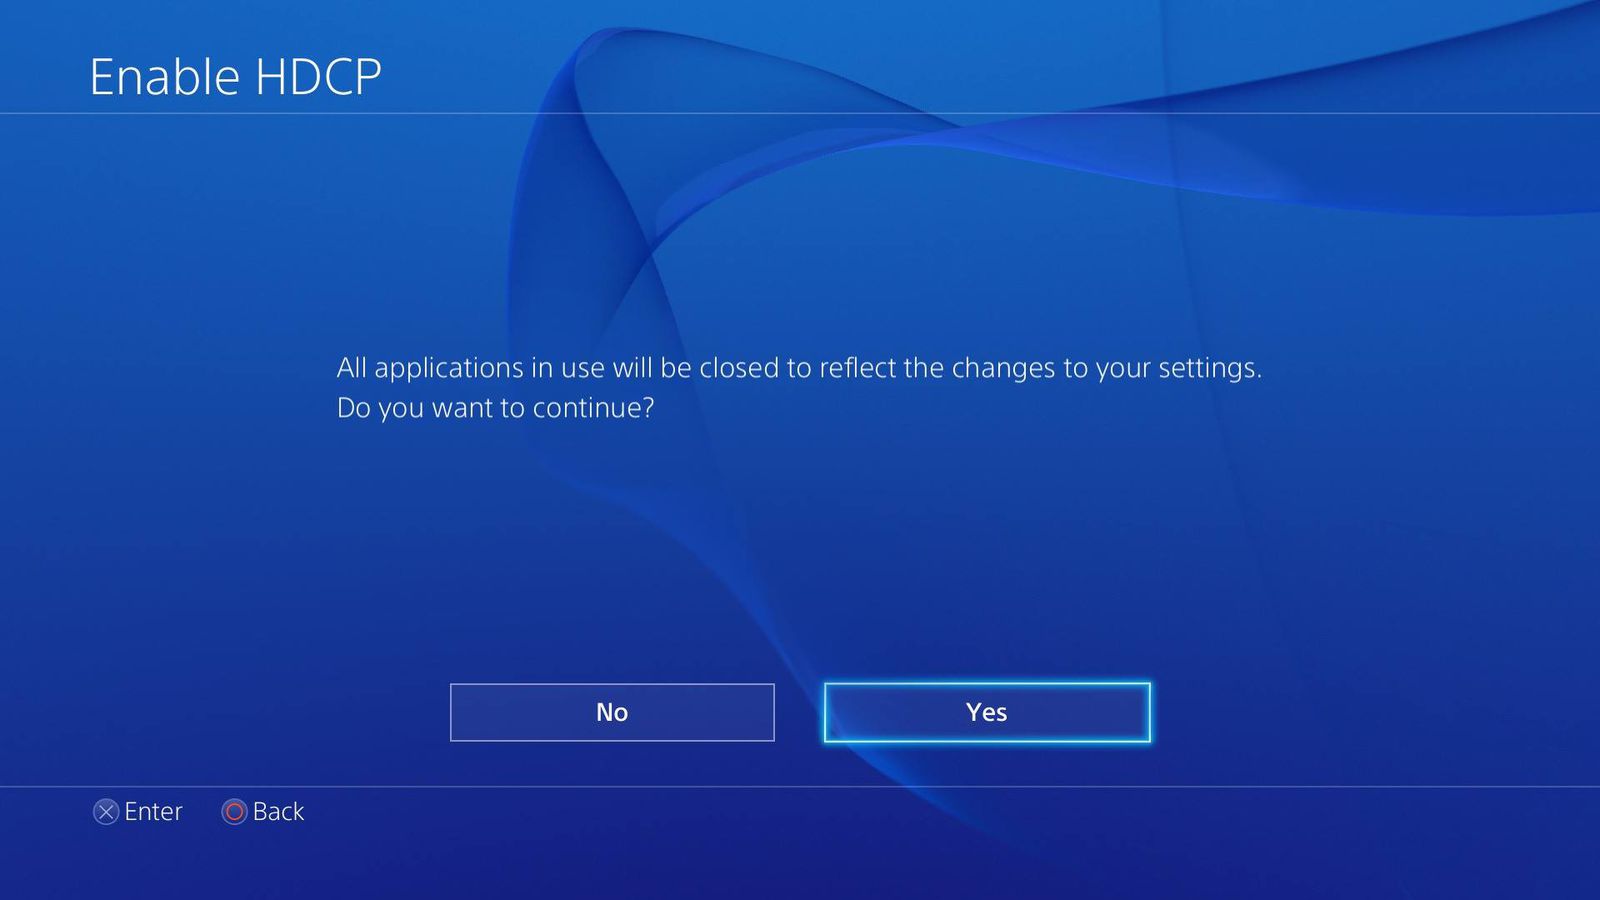 gennemførlig Flourish Gør livet PS4 HDCP toggle must be off to record games, on to watch video apps -  Polygon